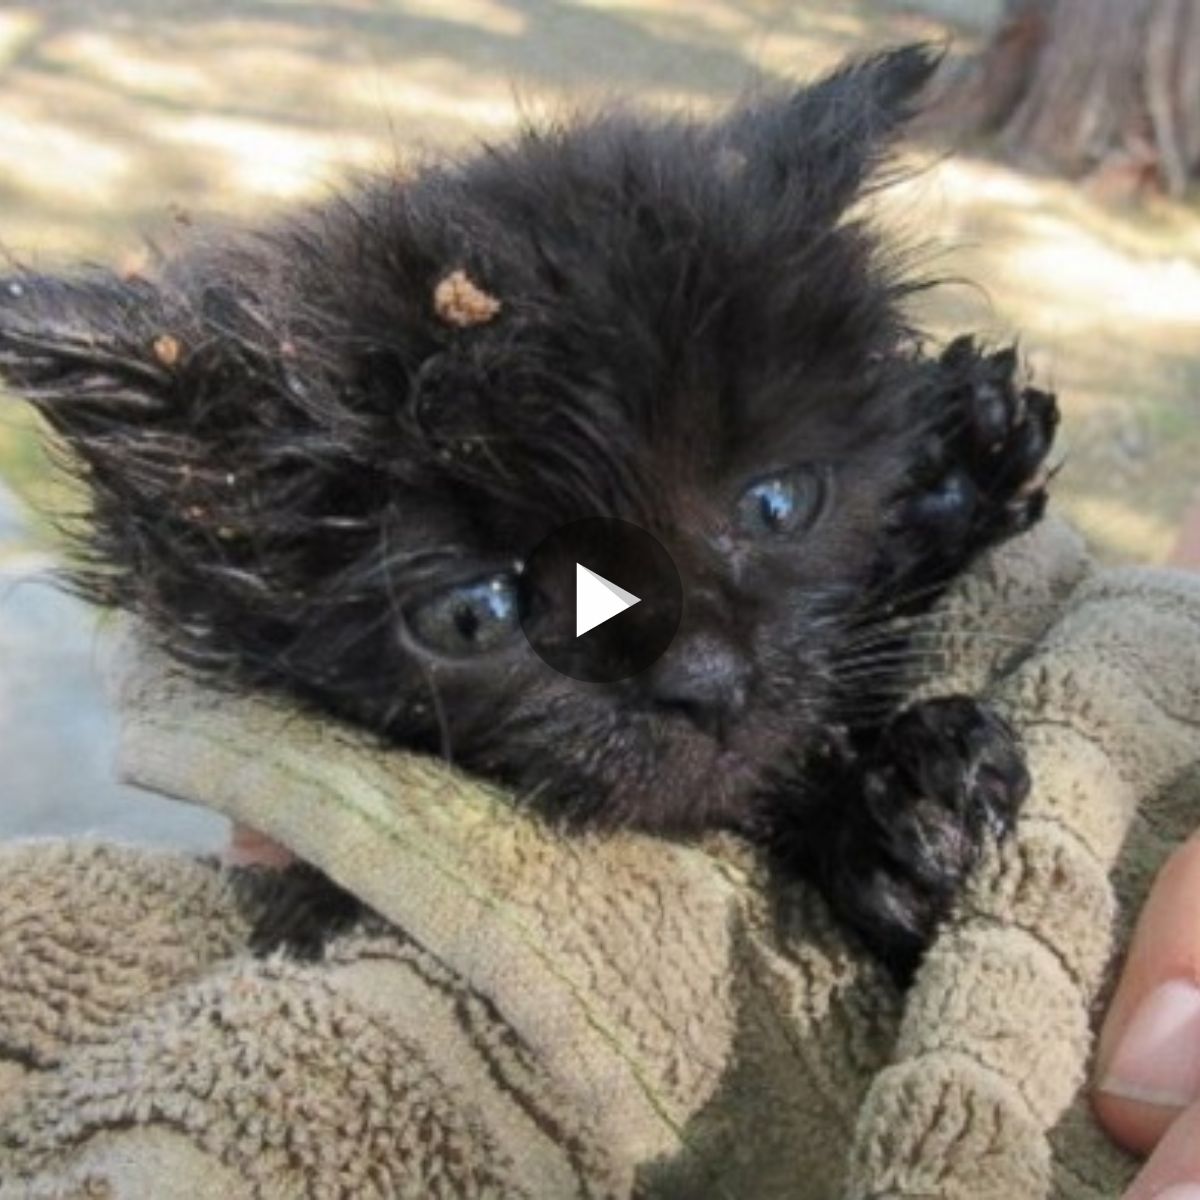 The phoenix Sewer Department rescued a small black kitten when it was a mere 5 weeks old.